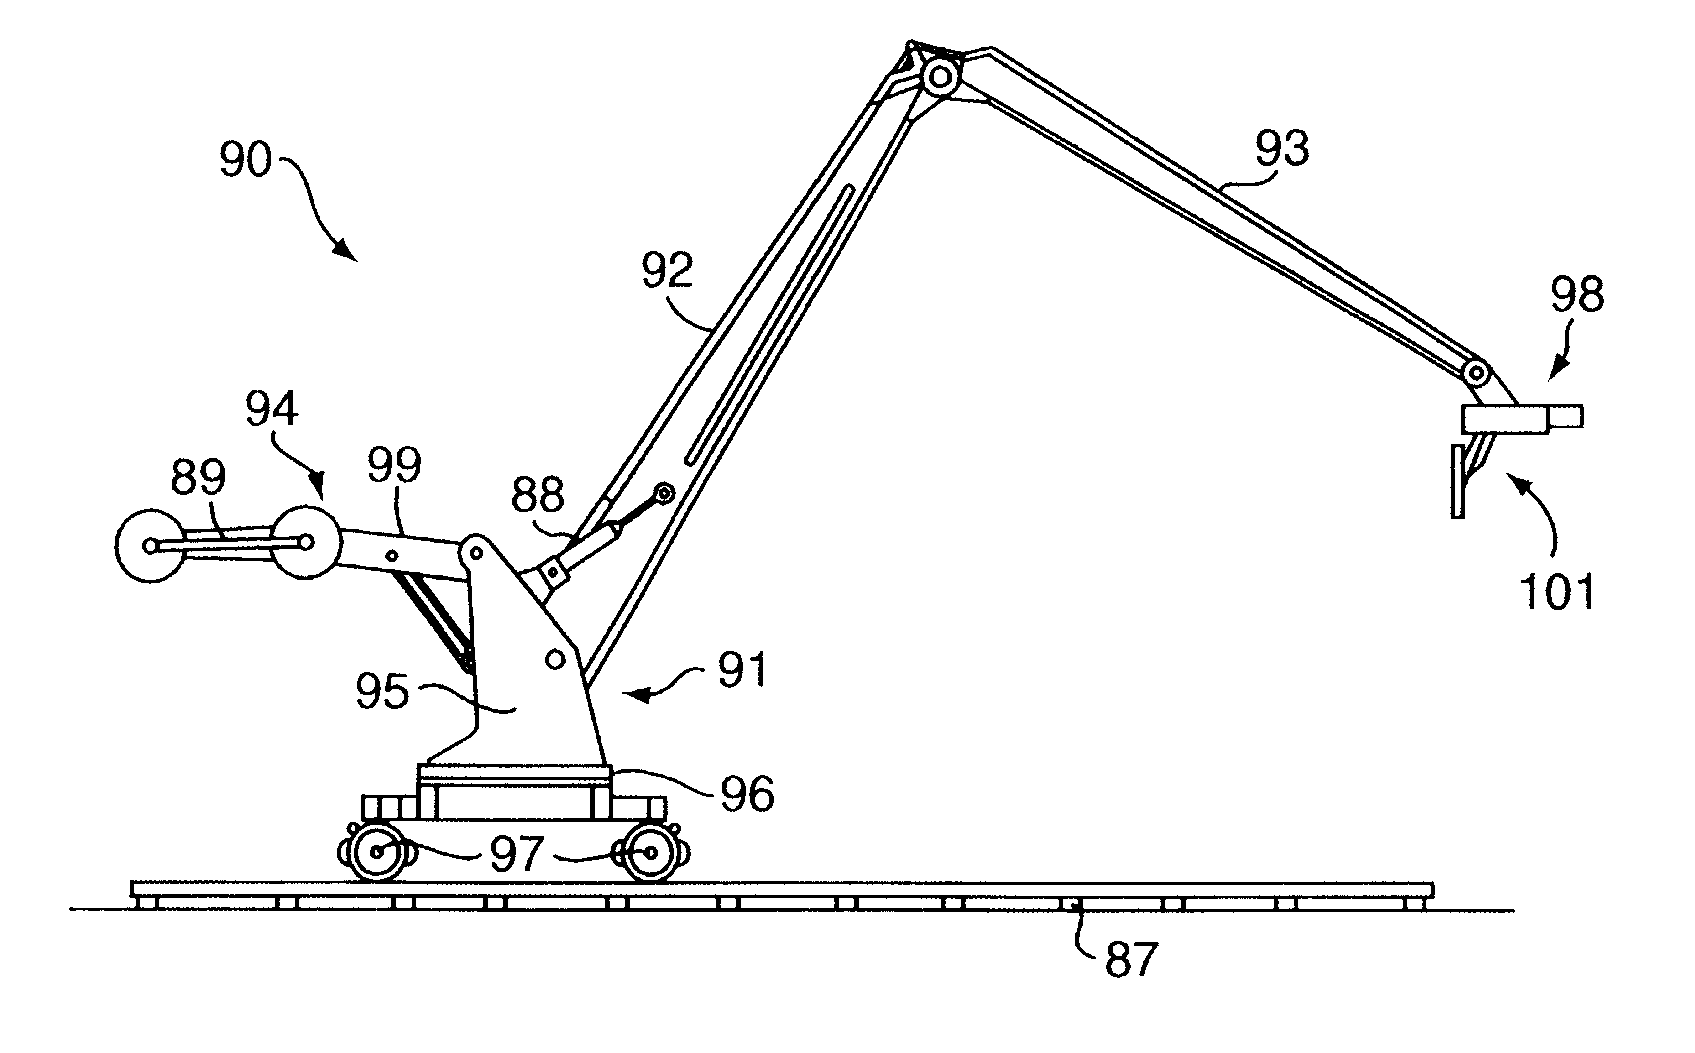 Method and apparatus for producing dynamic imagery in a visual medium